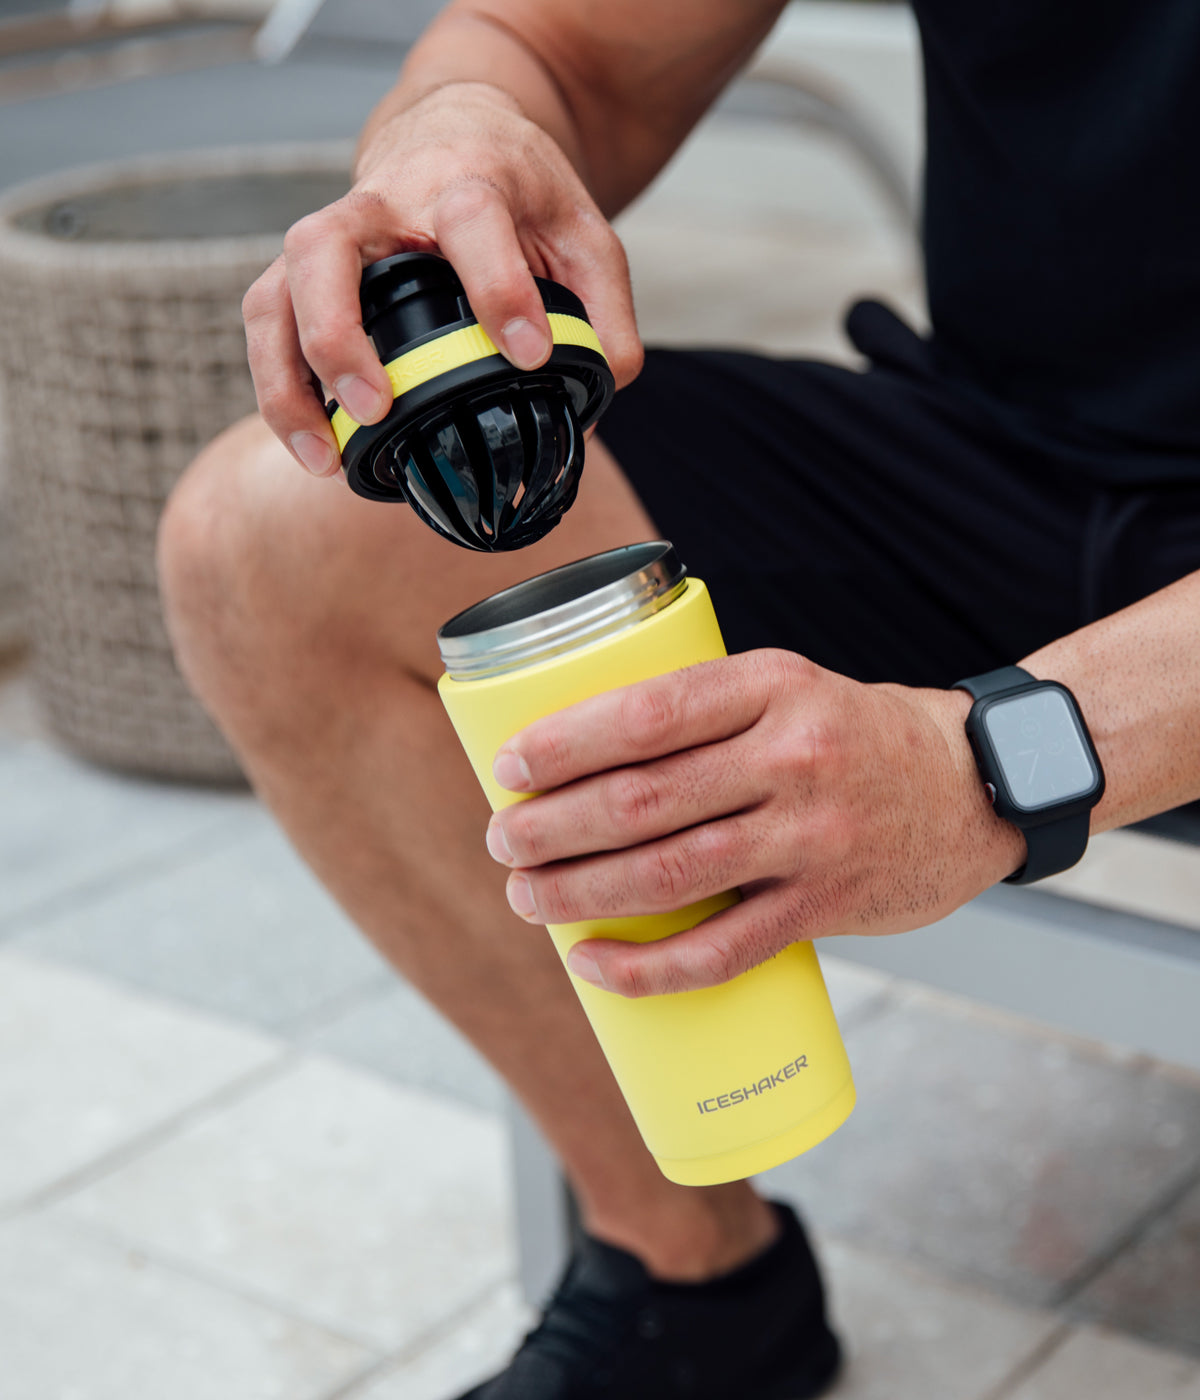 This image shoes the Yellow 26oz Ice Shaker being opened by an man. The close up view of the 26oz Ice Shaker shows the lid being twisted off, revealing the patented lid and agitator combo. The other hand holds the 26oz Yellow Insulated Bottle.